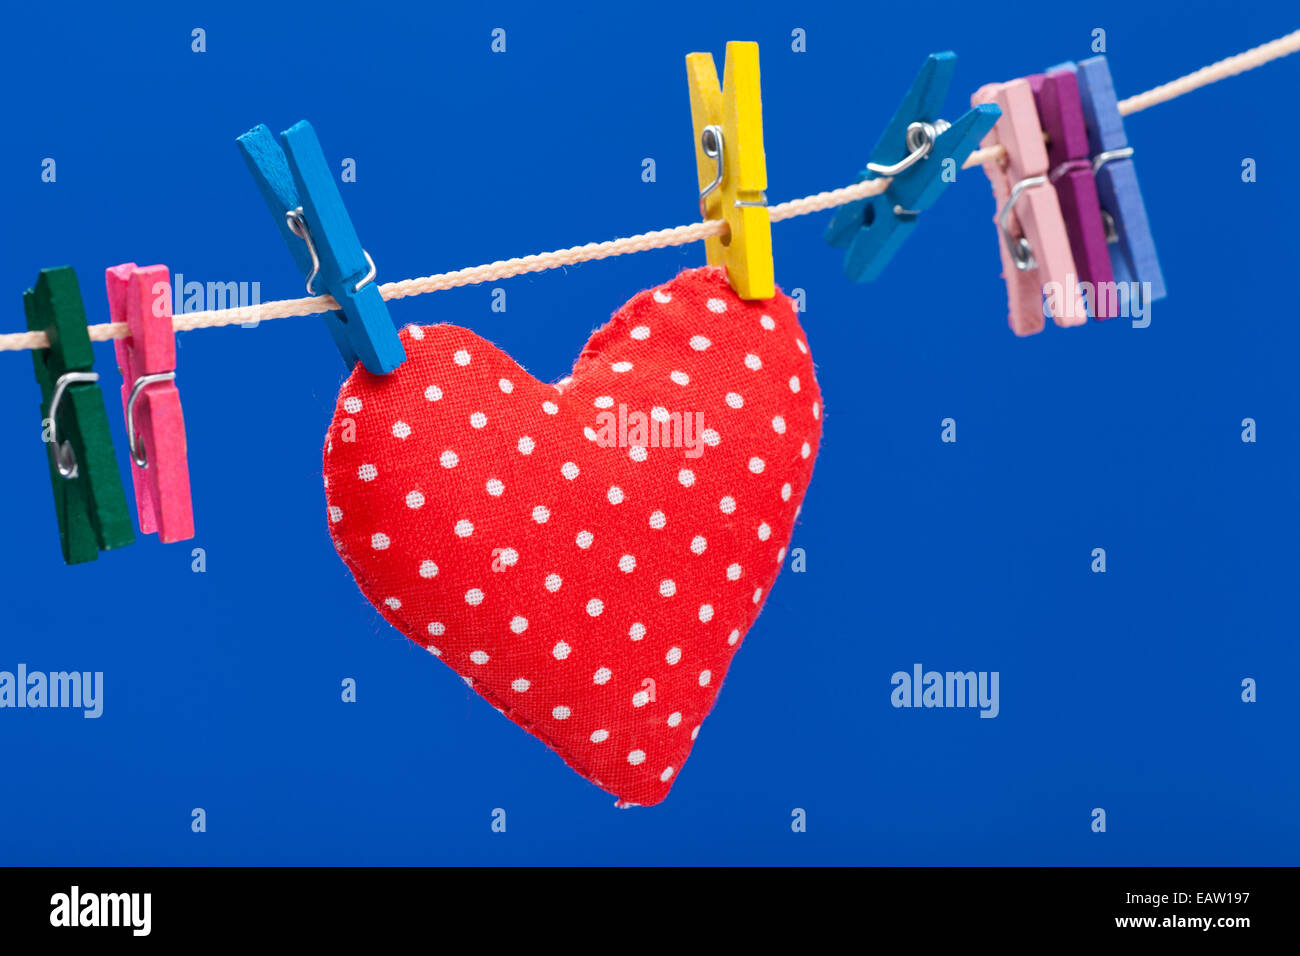 red heart hanging on a clothesline with clothespins, blue background Stock Photo